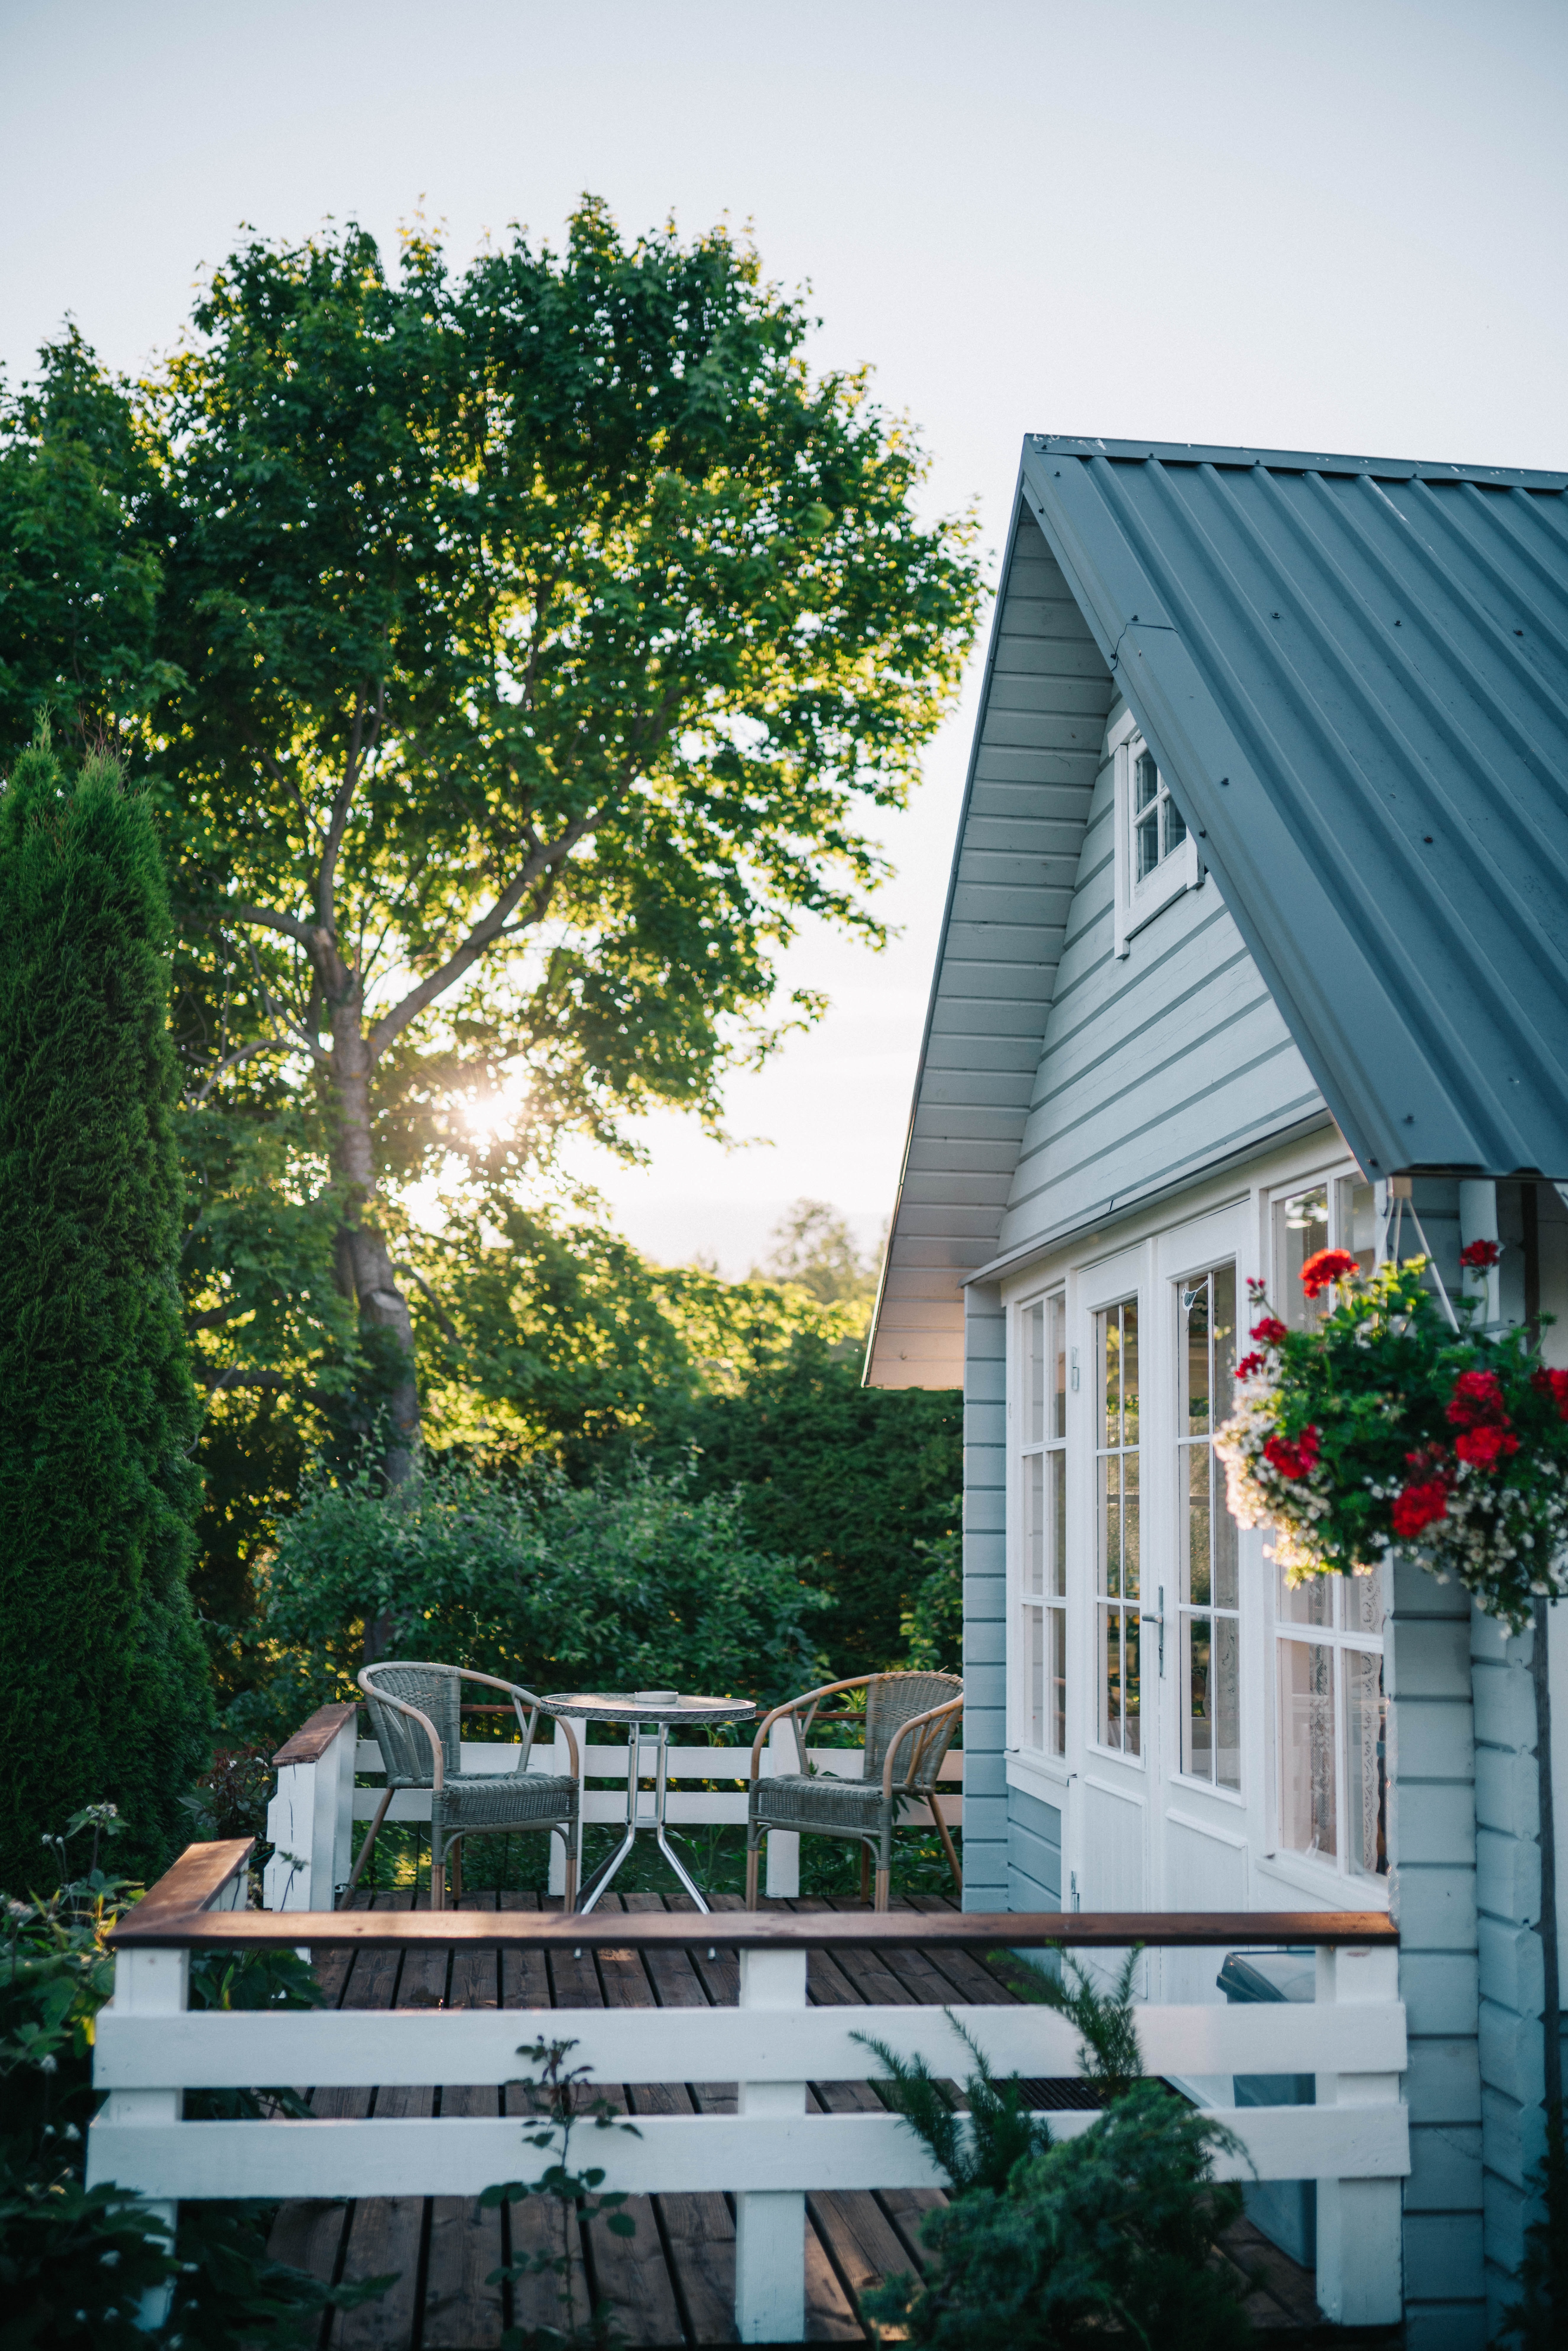 A cottage-style home porch at dusk, highlighting what a mortgage amortization is